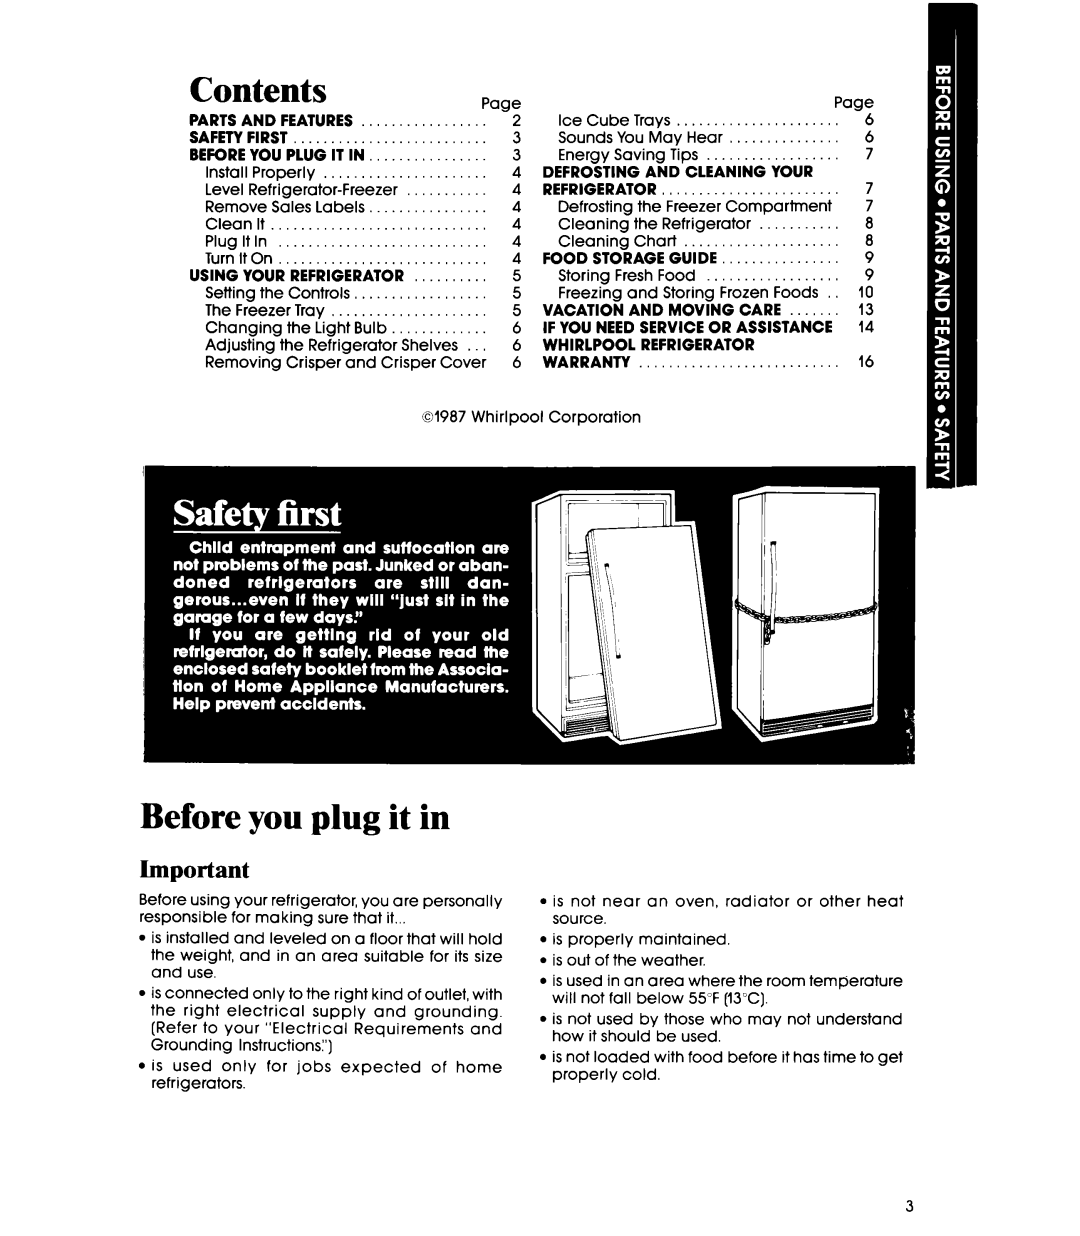 Whirlpool EL15SC manual Contents, Before you plug it in 